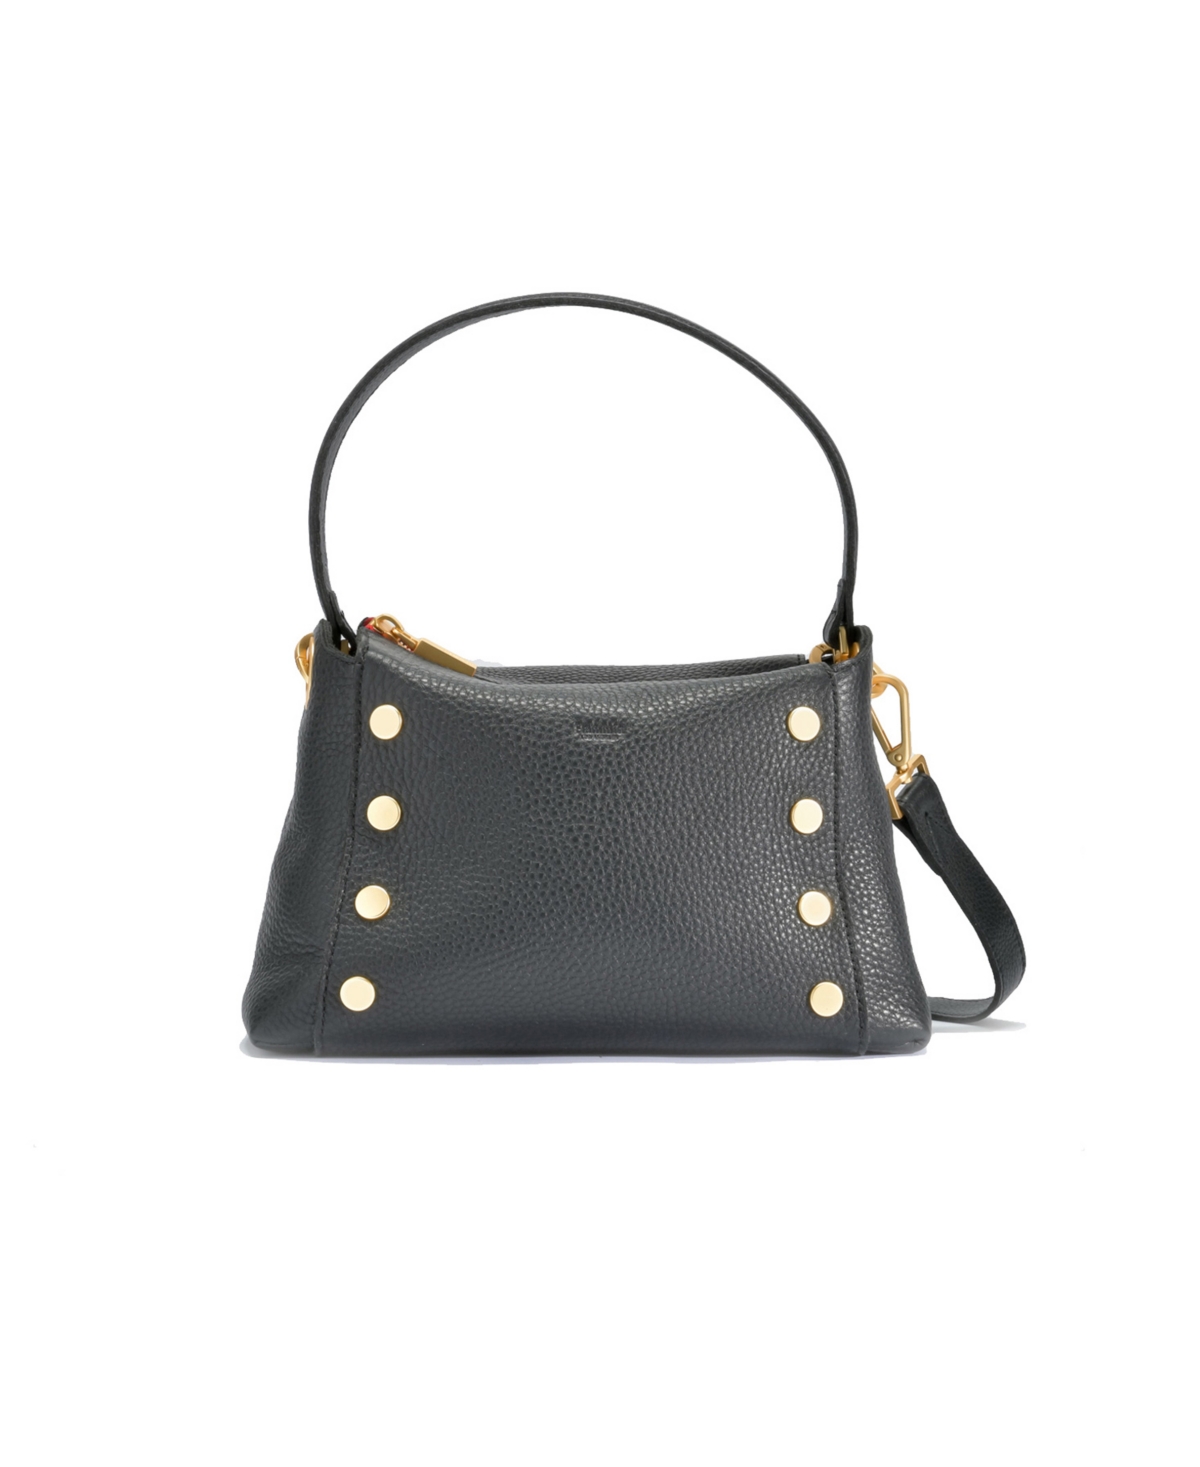 Bryant Small Leather Shoulder Crossbody - North End/